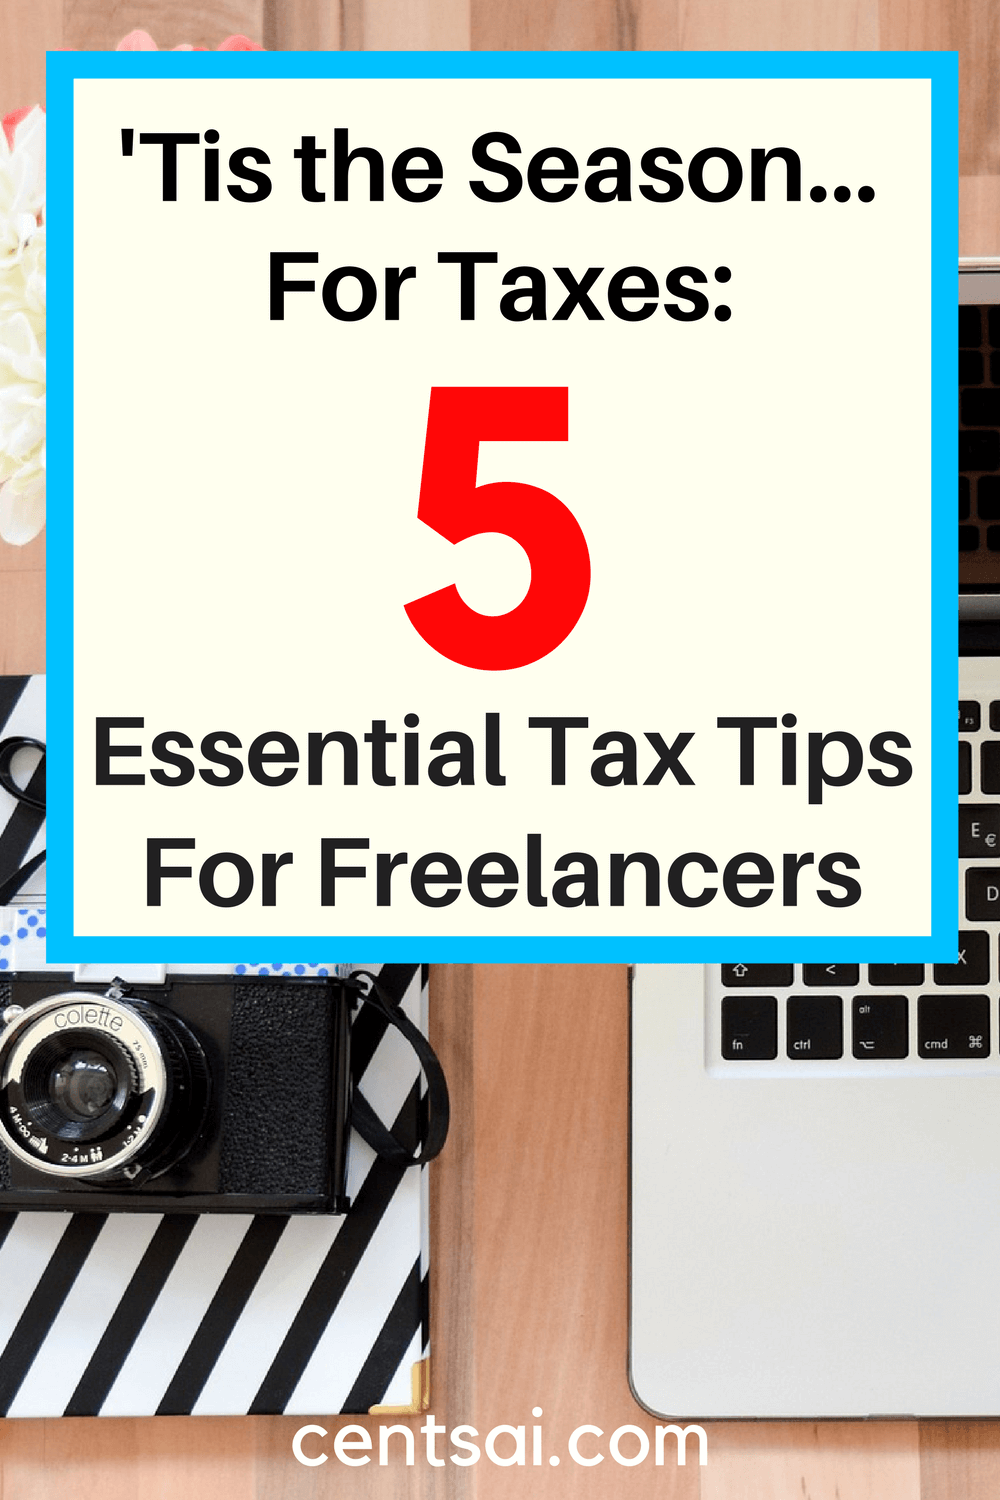 'Tis the Season... For Taxes: 5 Essential Tax Tips For Freelancers